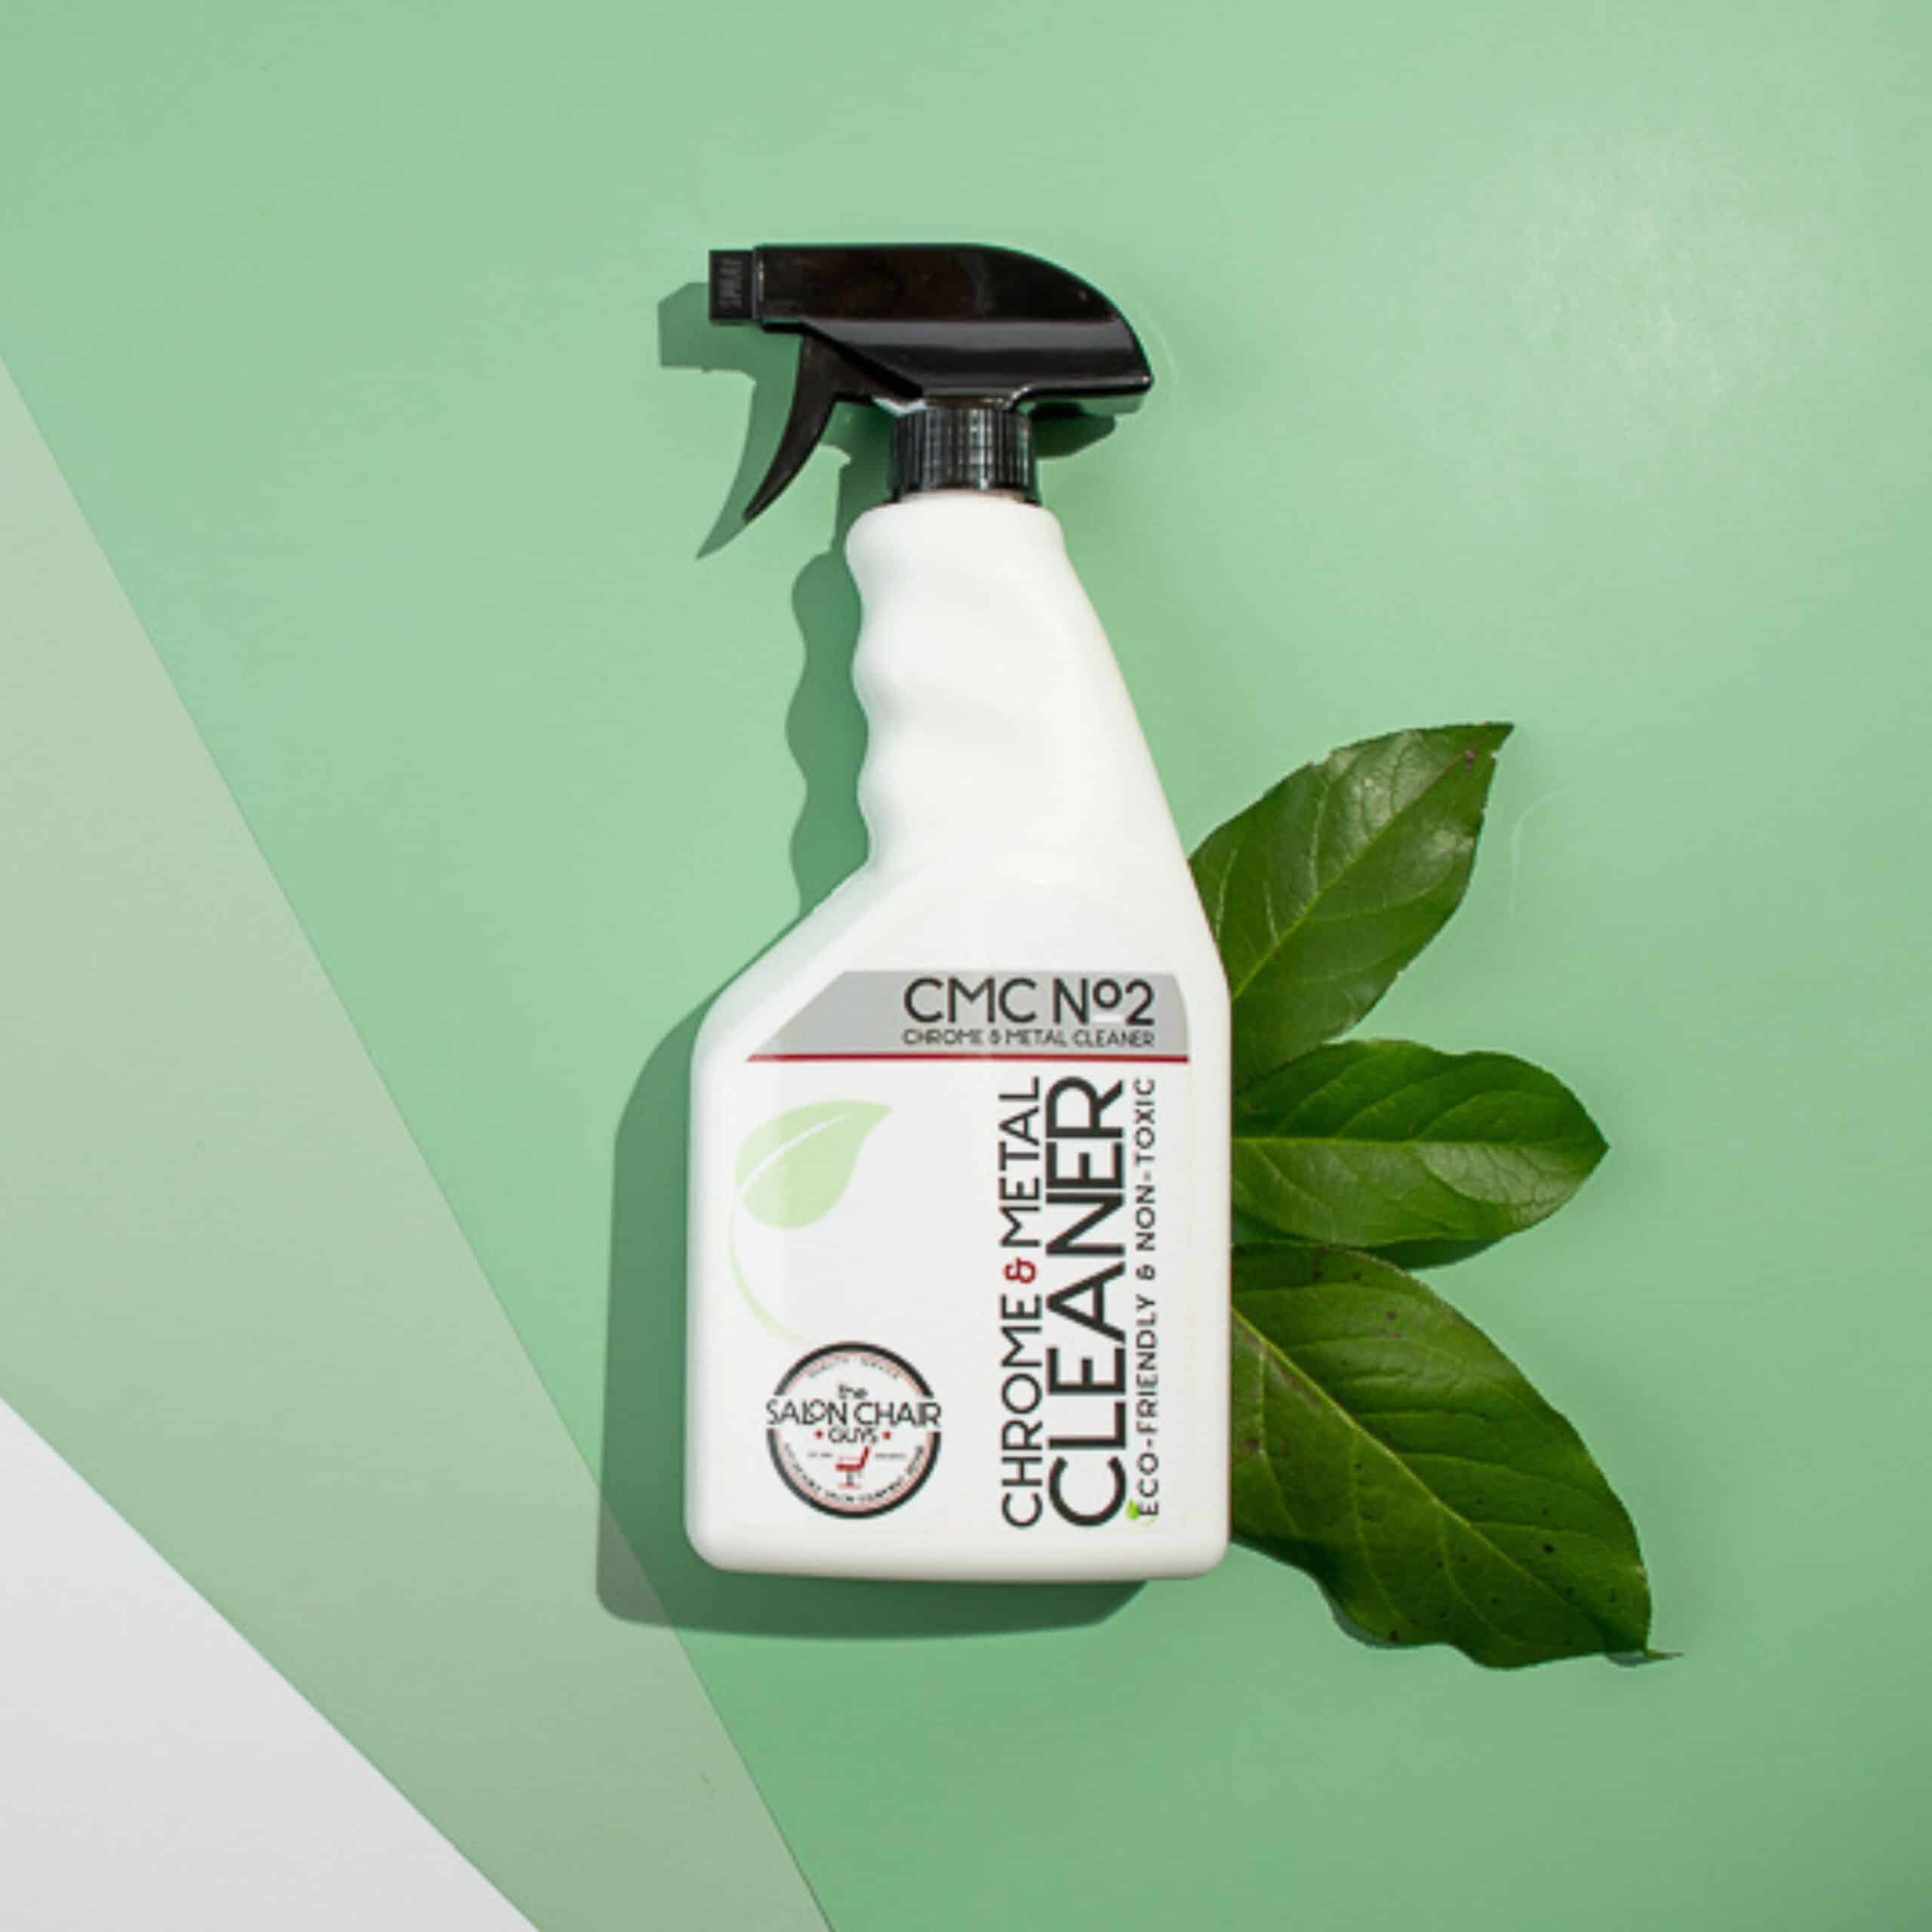 Chrome & Metal Cleaner - Biodegradable Chrome and Metal Cleaner For  Stainless Steel Counters, Appliances, Tools, Salon & Barber Chairs 24 Ounces